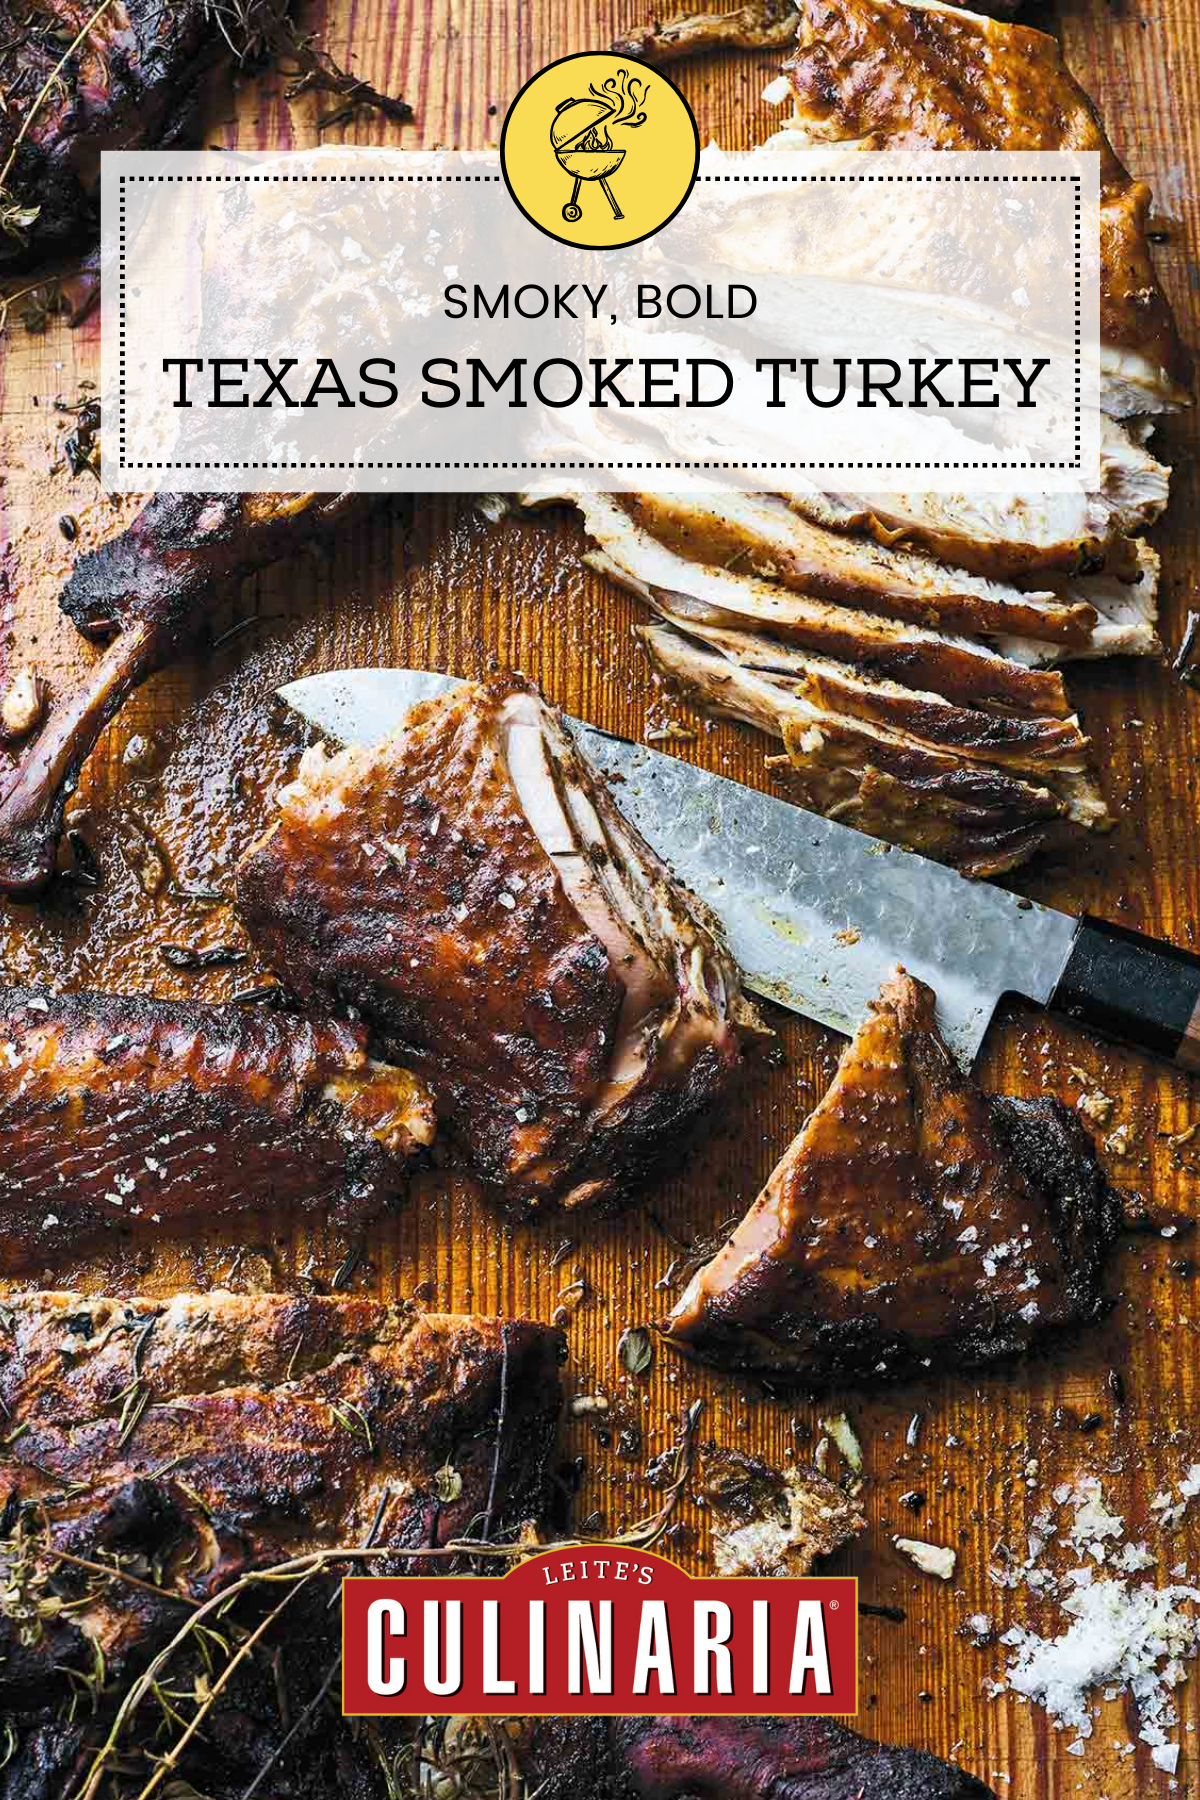 A Texas style smoked turkey cut into breast and leg pieces on a cutting board with a knife.